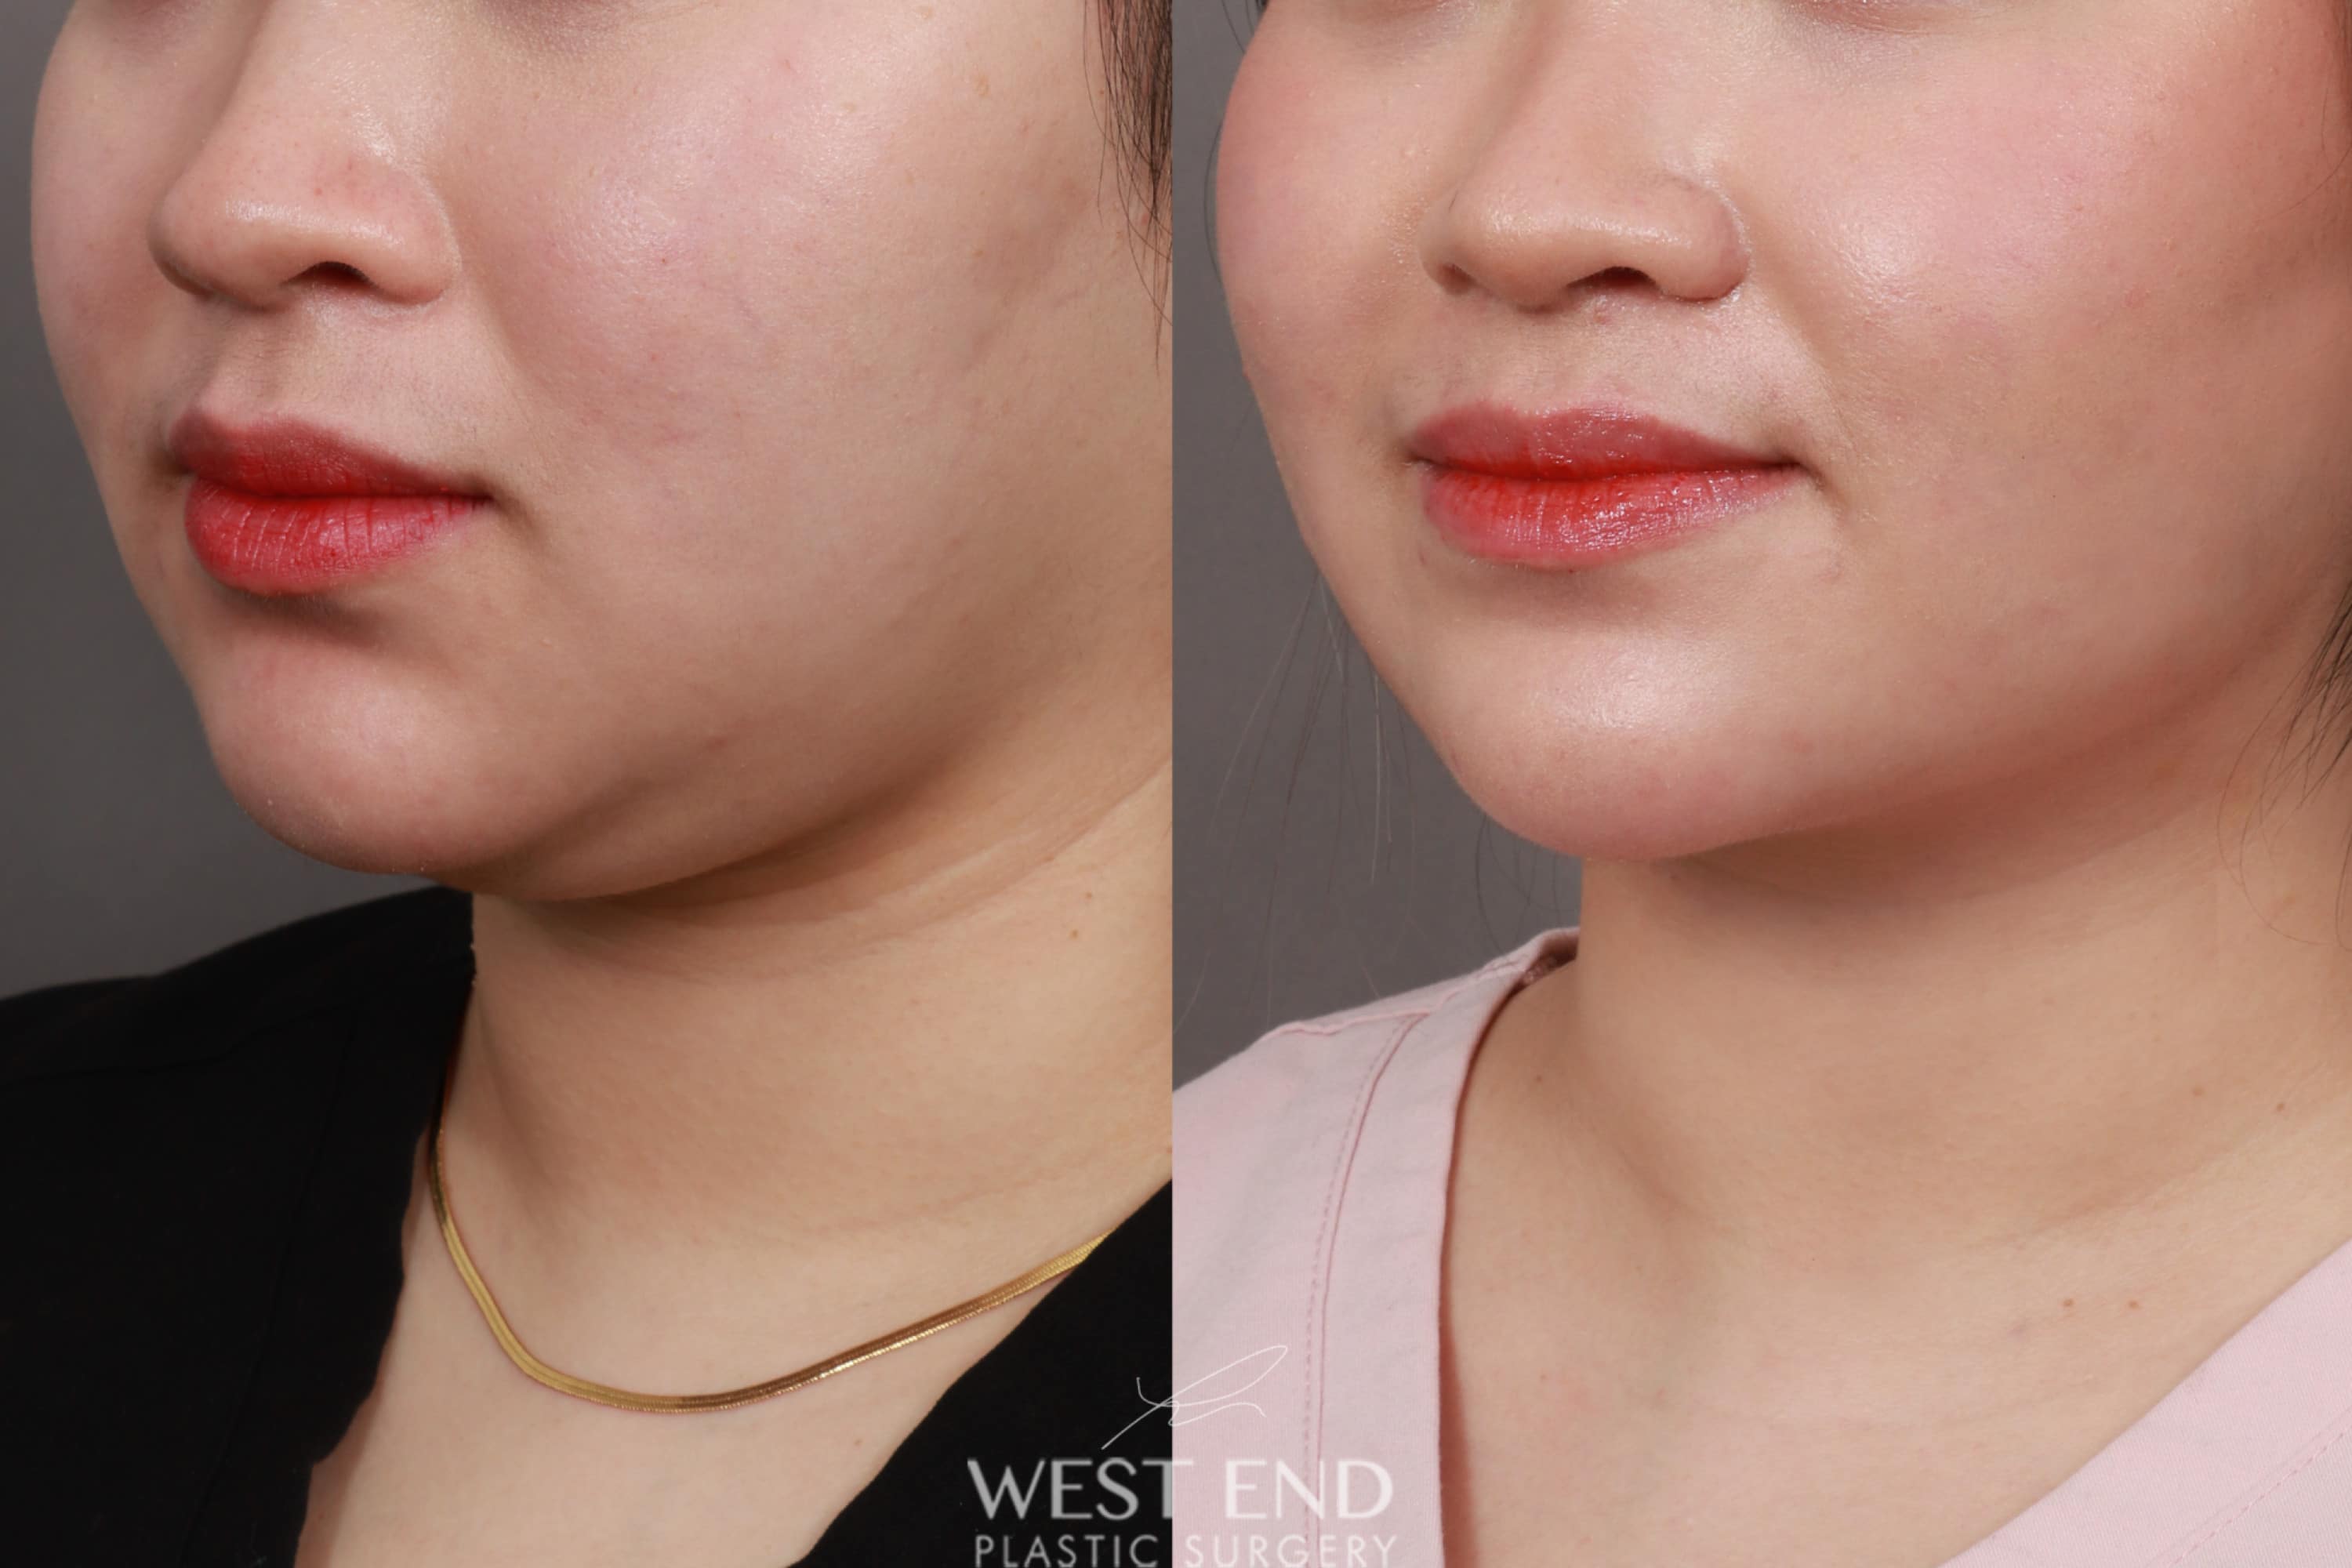 Liposuction of the Submental, Jawline, and Neck Region (2 Weeks Post-Op)